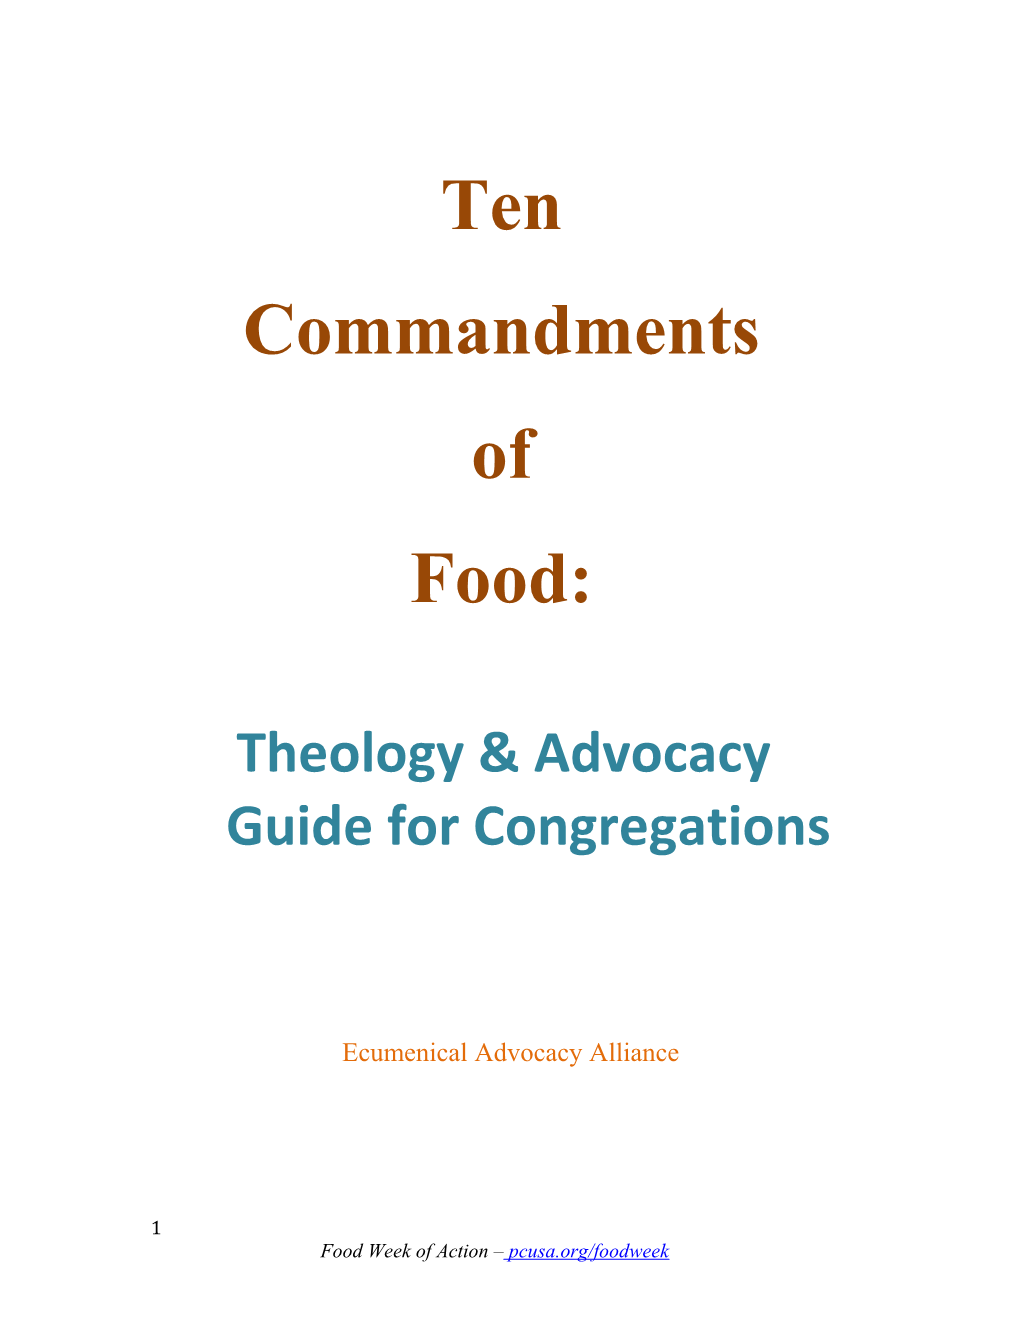 Theology & Advocacy Guide for Congregations